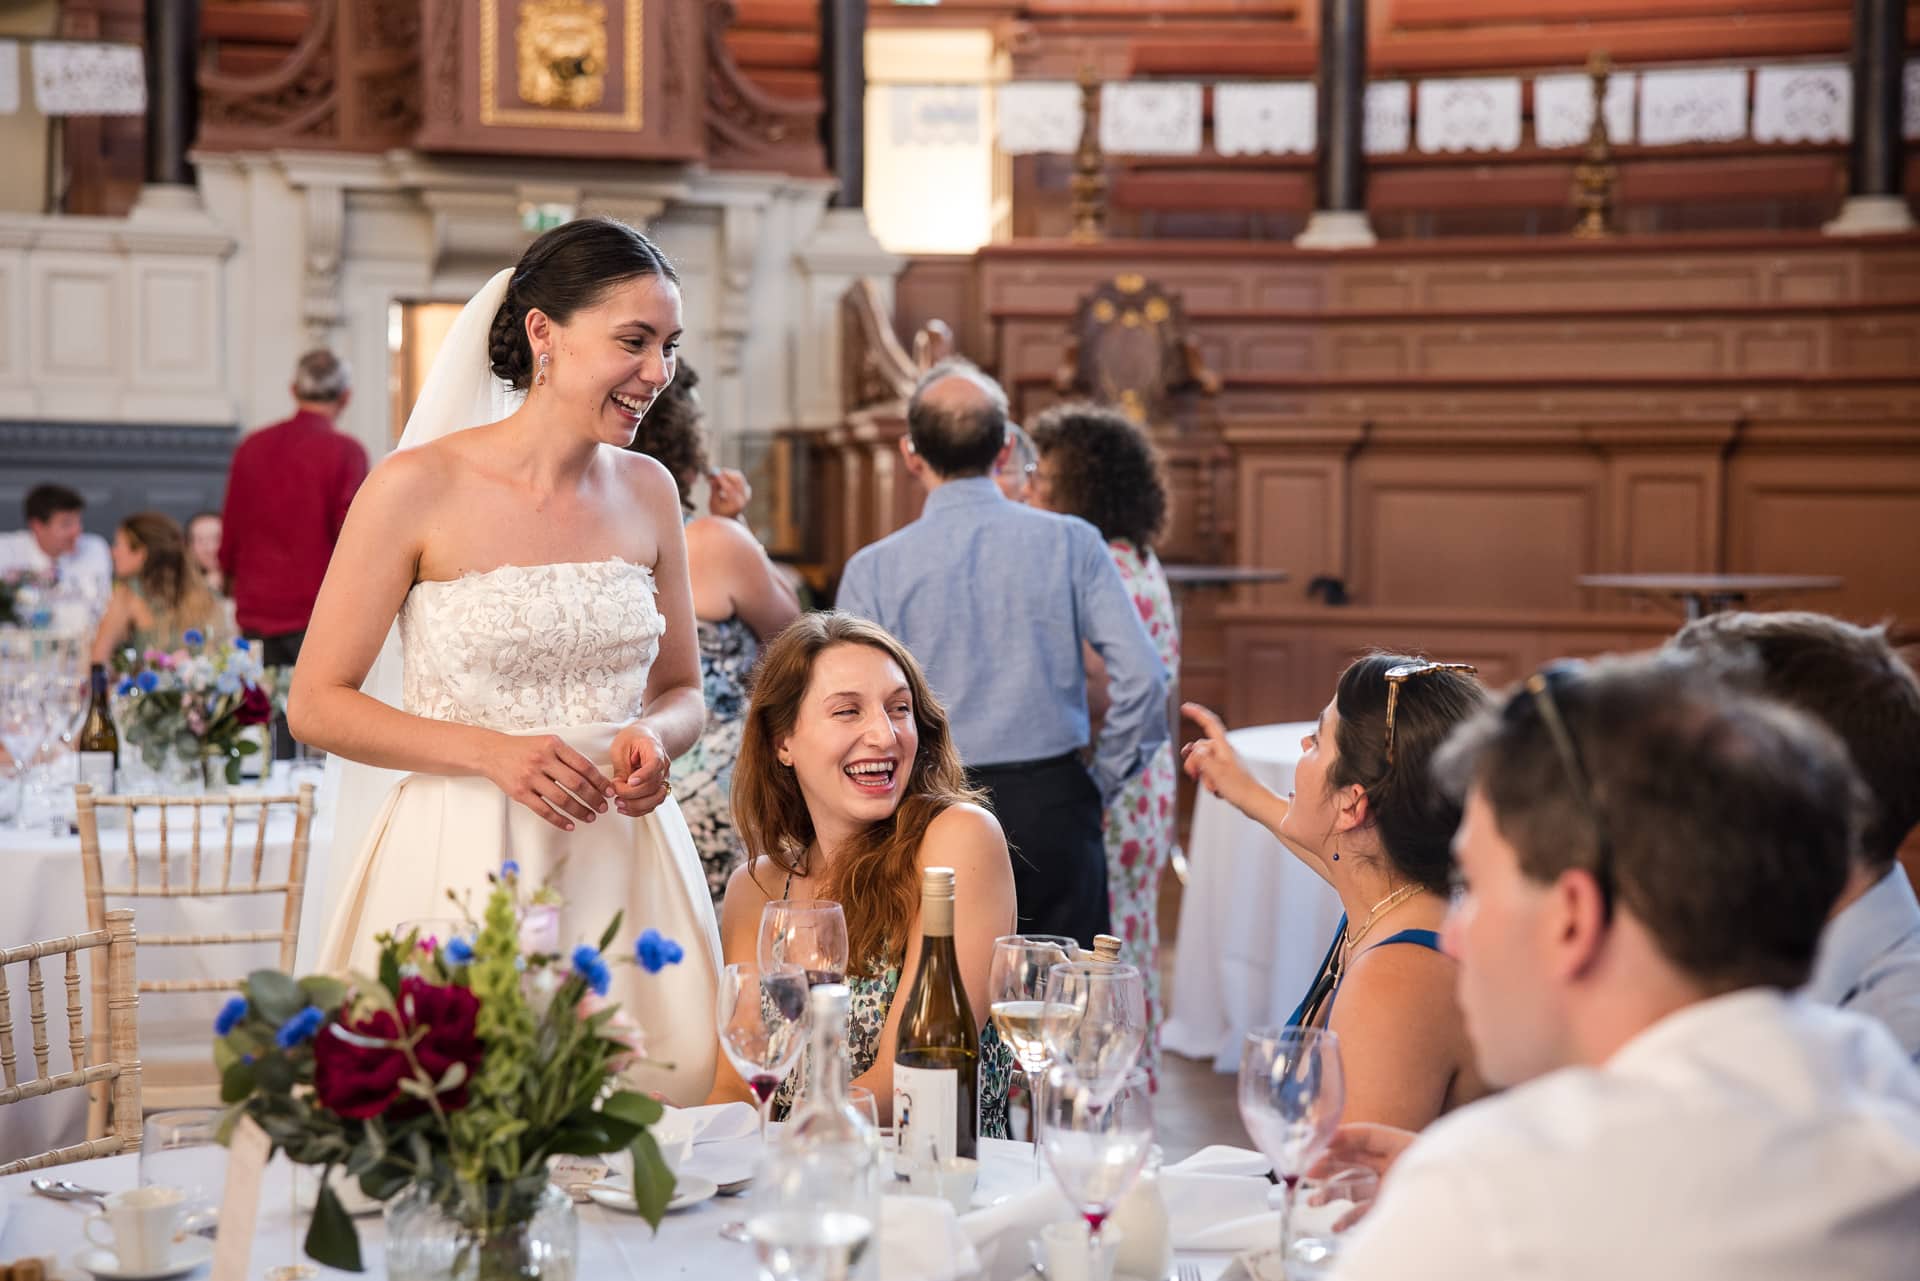 Bride and her friends laughing at the dining table inside the Sheldonian Theatre